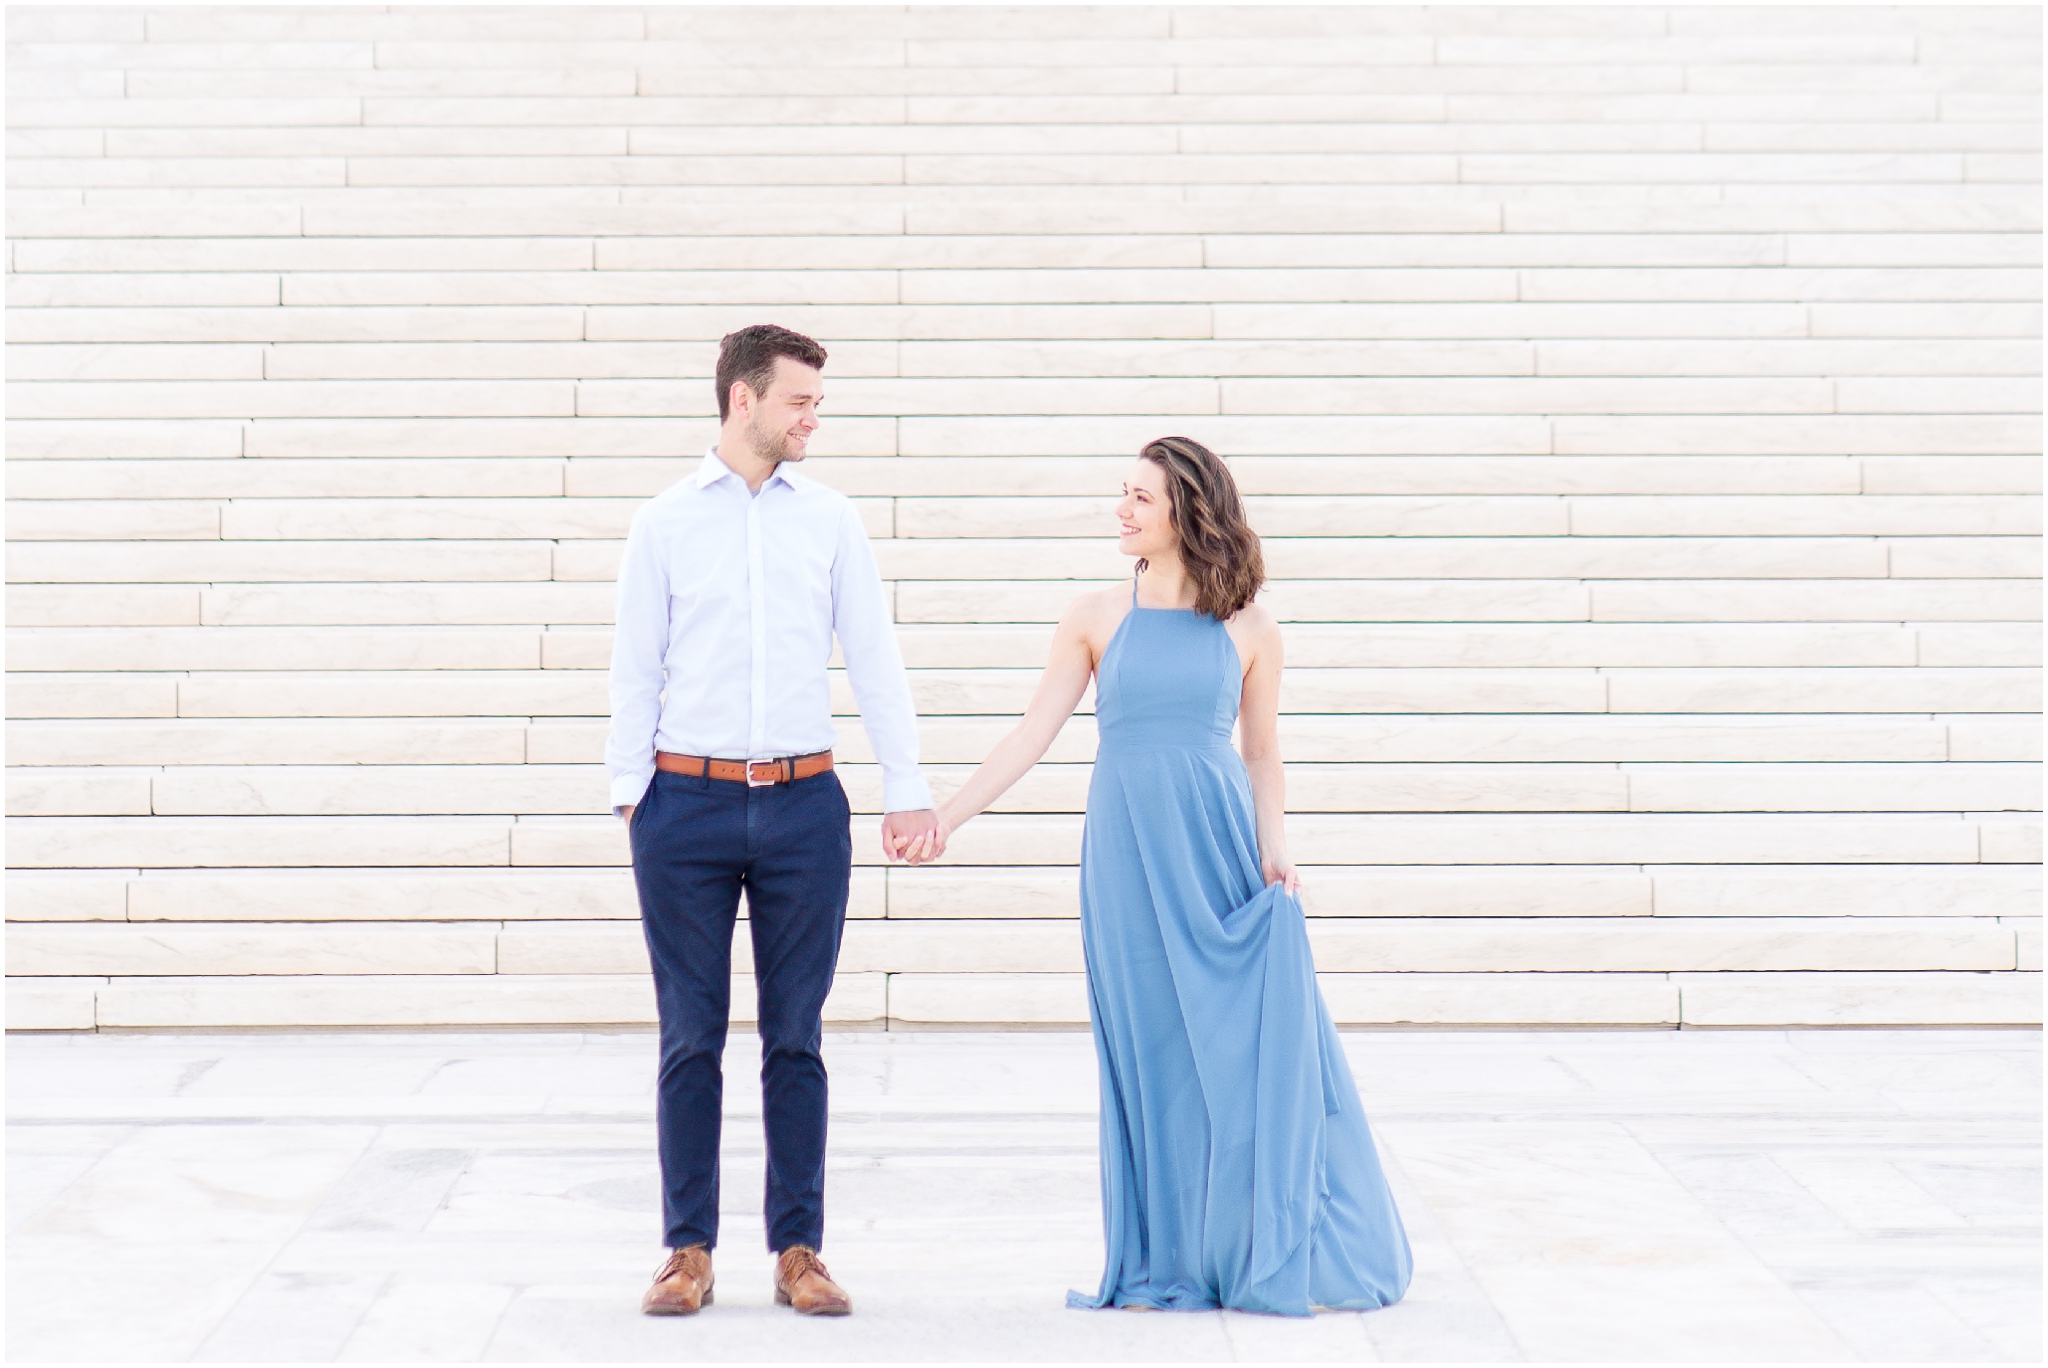 DC engagement photographer captured us capitol building engagement session in Washington D.C., and went to the Supreme Court Building, as well as the Library of Congress steps. Deanna wore a slate blue Lulu’s Mythical Kind of Love Dress.